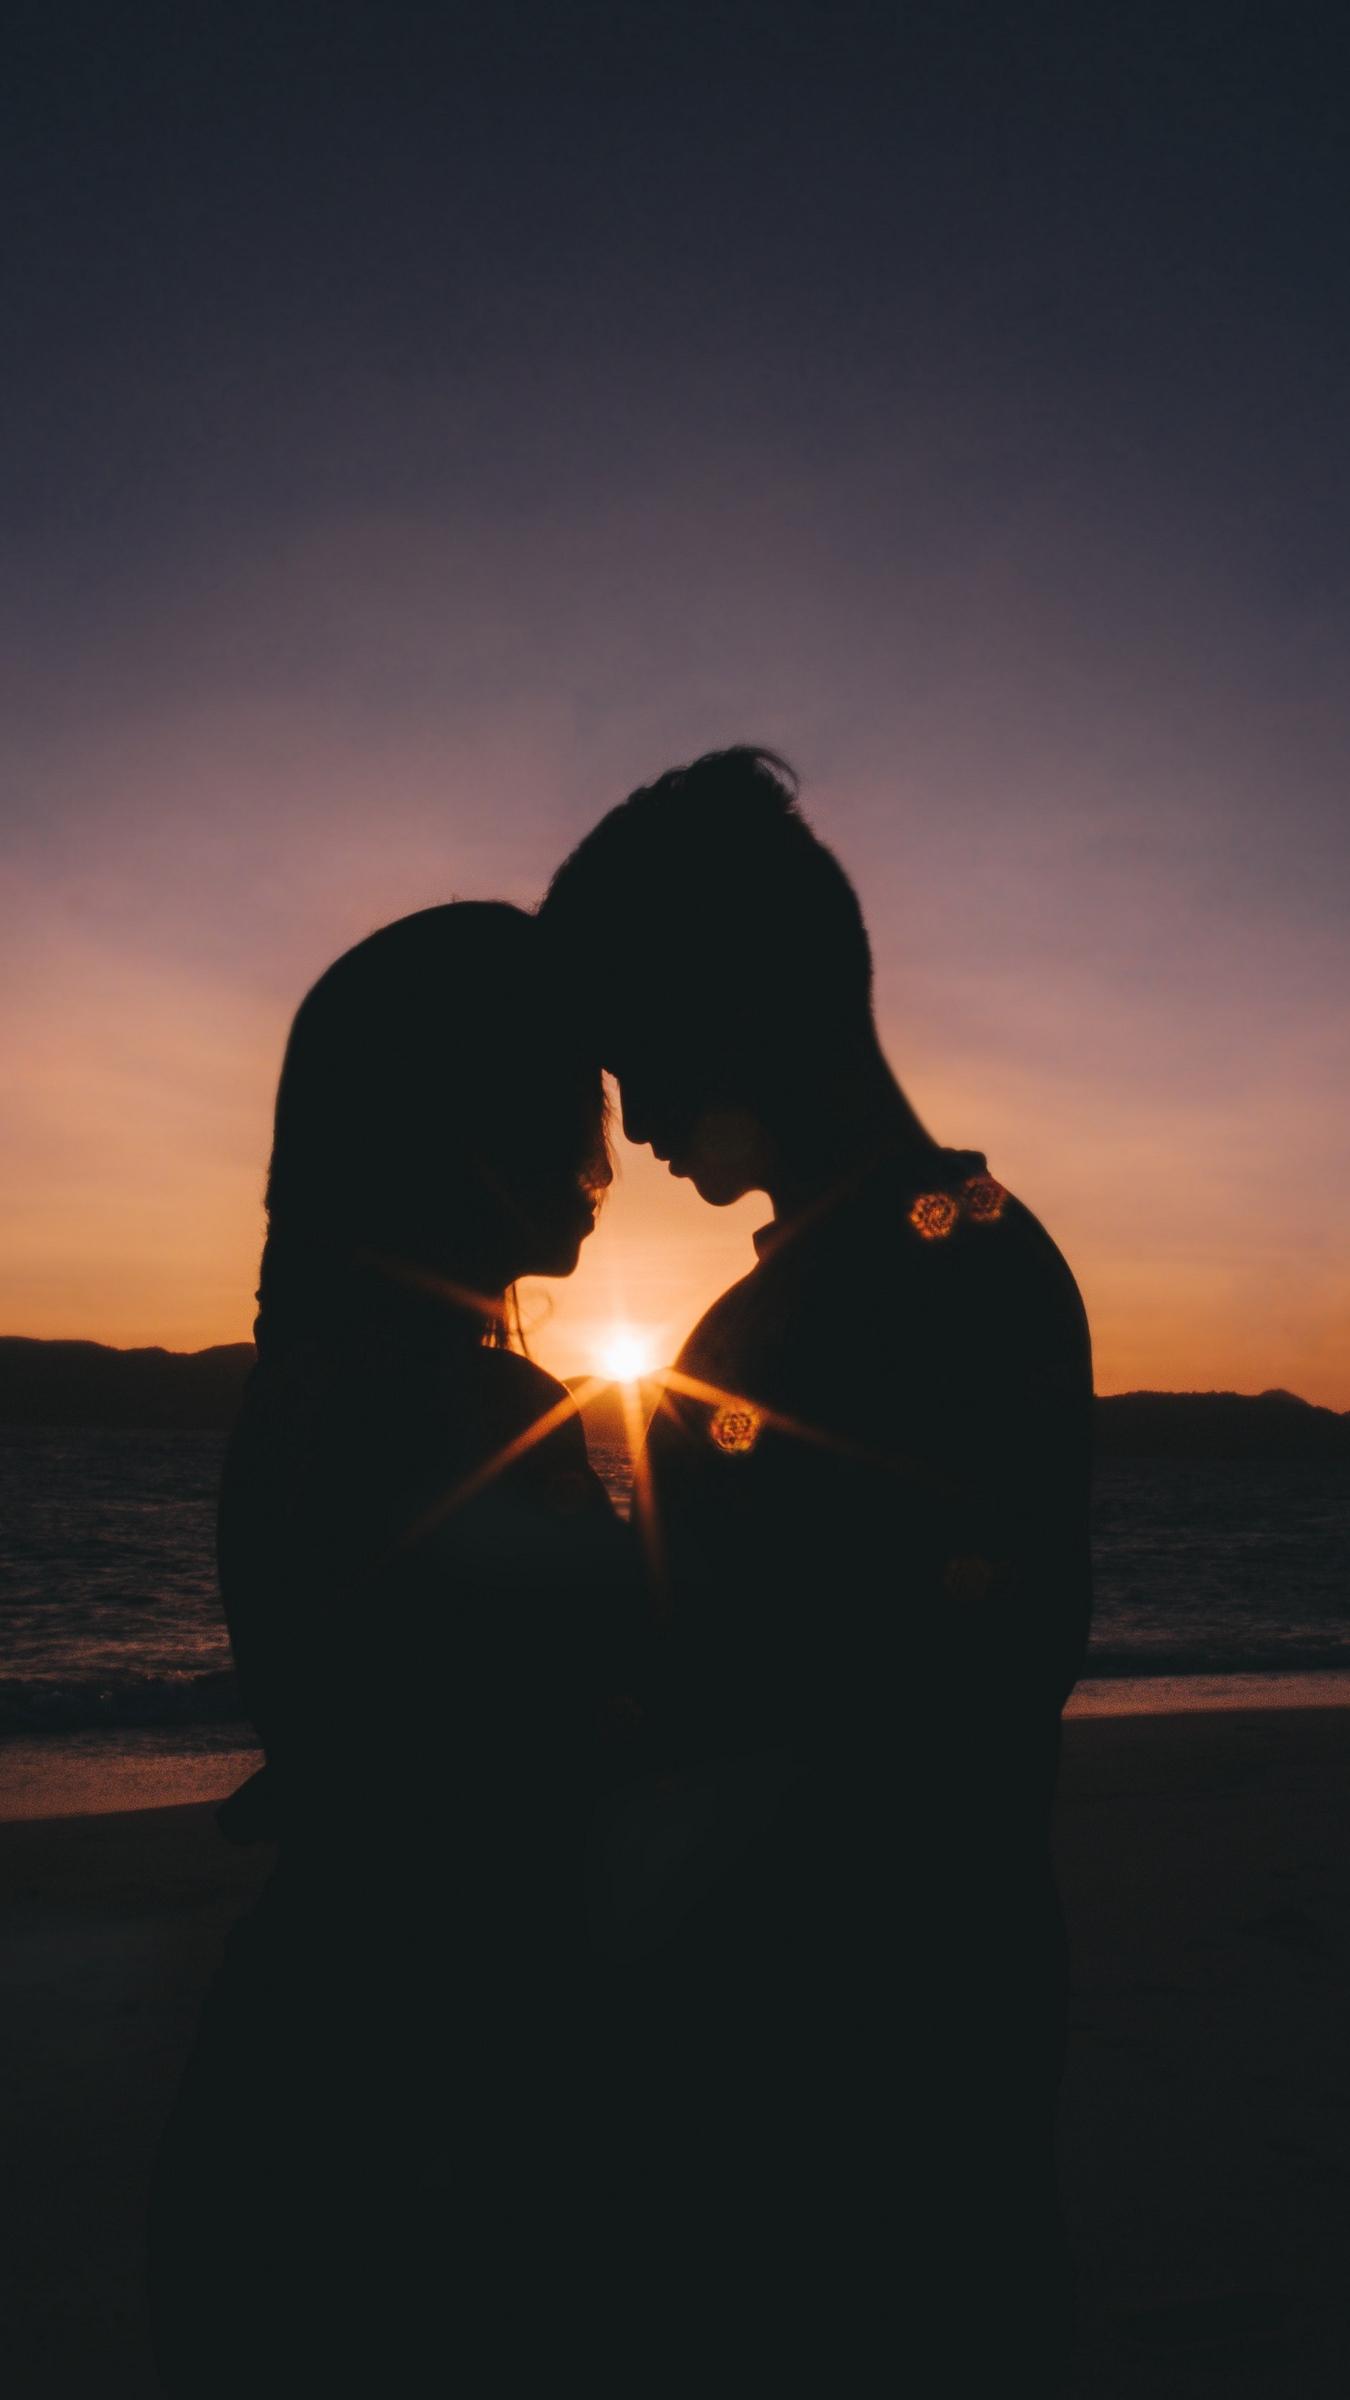 kissing couple silhouette sunset